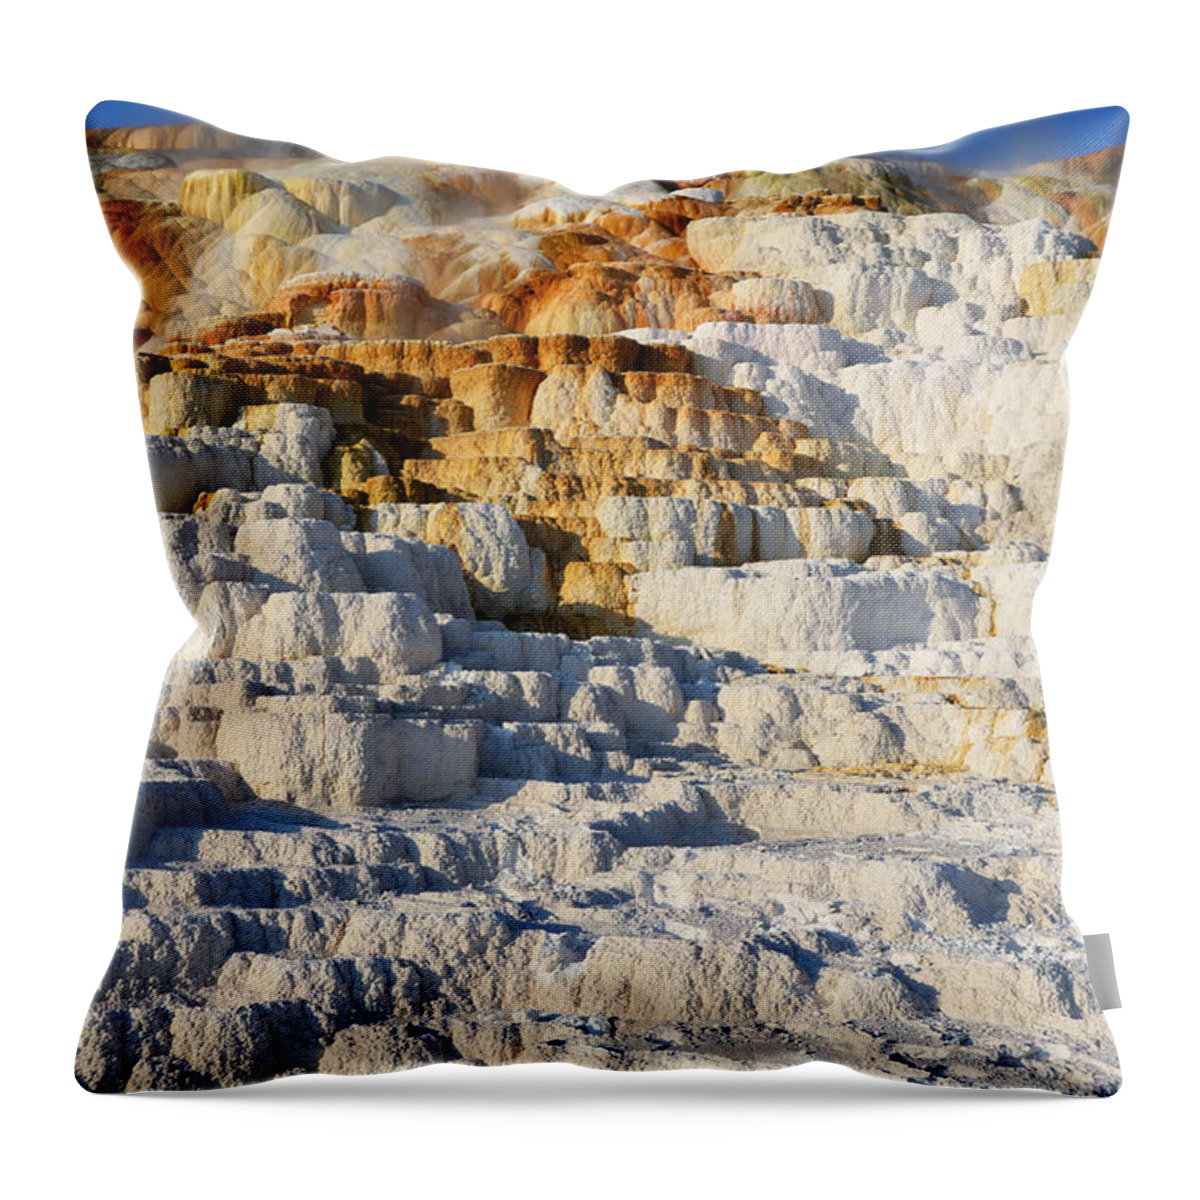 Yellowstone Throw Pillow featuring the photograph Steam Topped Travertine Hot Spring Terraces Mammoth Hot Springs Yellowstone National Park by Shawn O'Brien